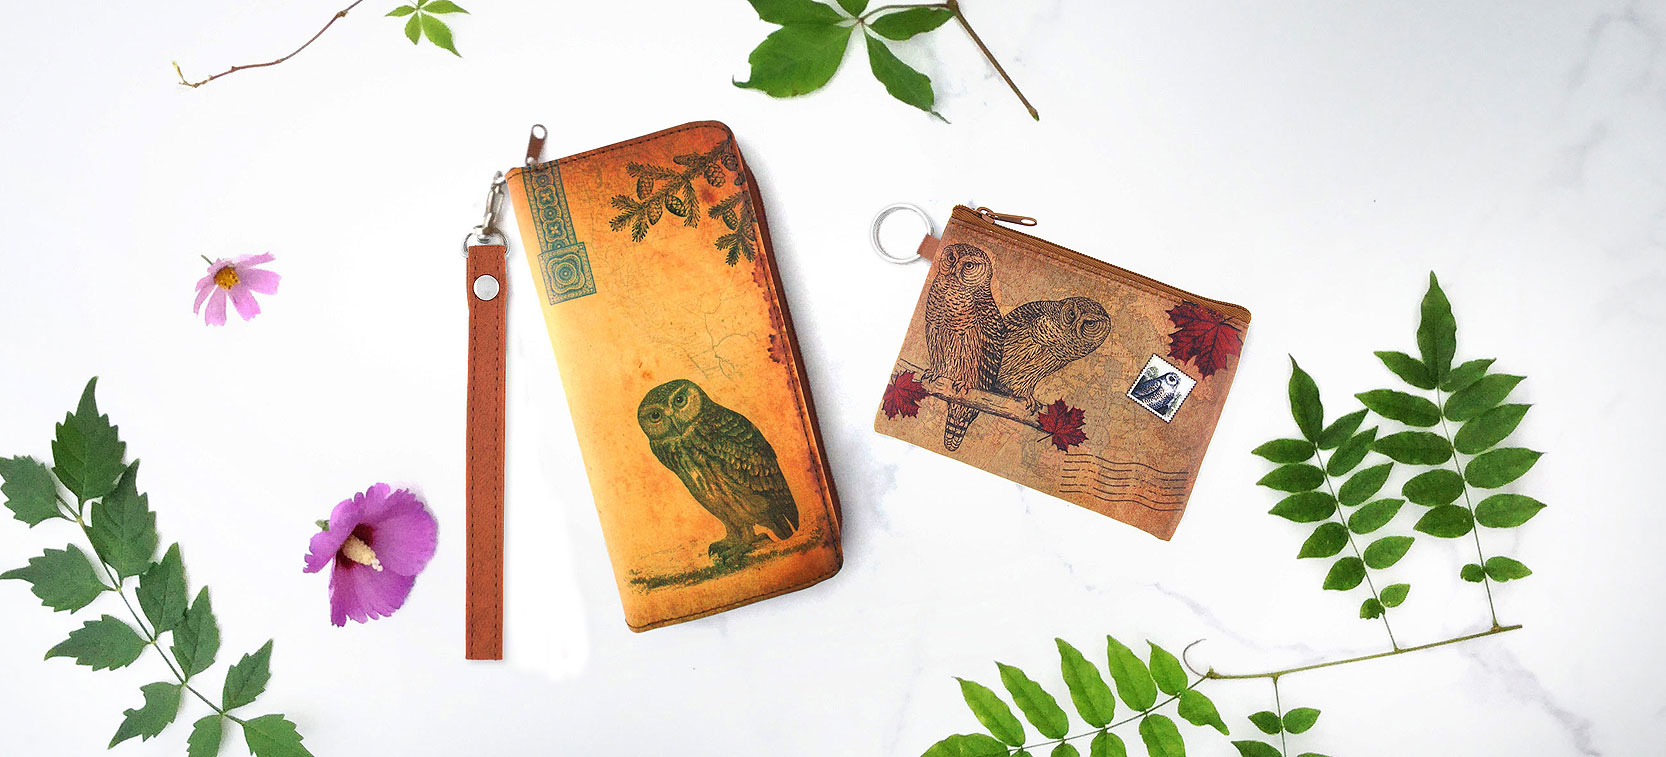 LAVISHY design and wholesale owl themed vegan accessories and gfits to gift shops, boutiques and book shops, souvenir stores in Canada, USA and worldwide.